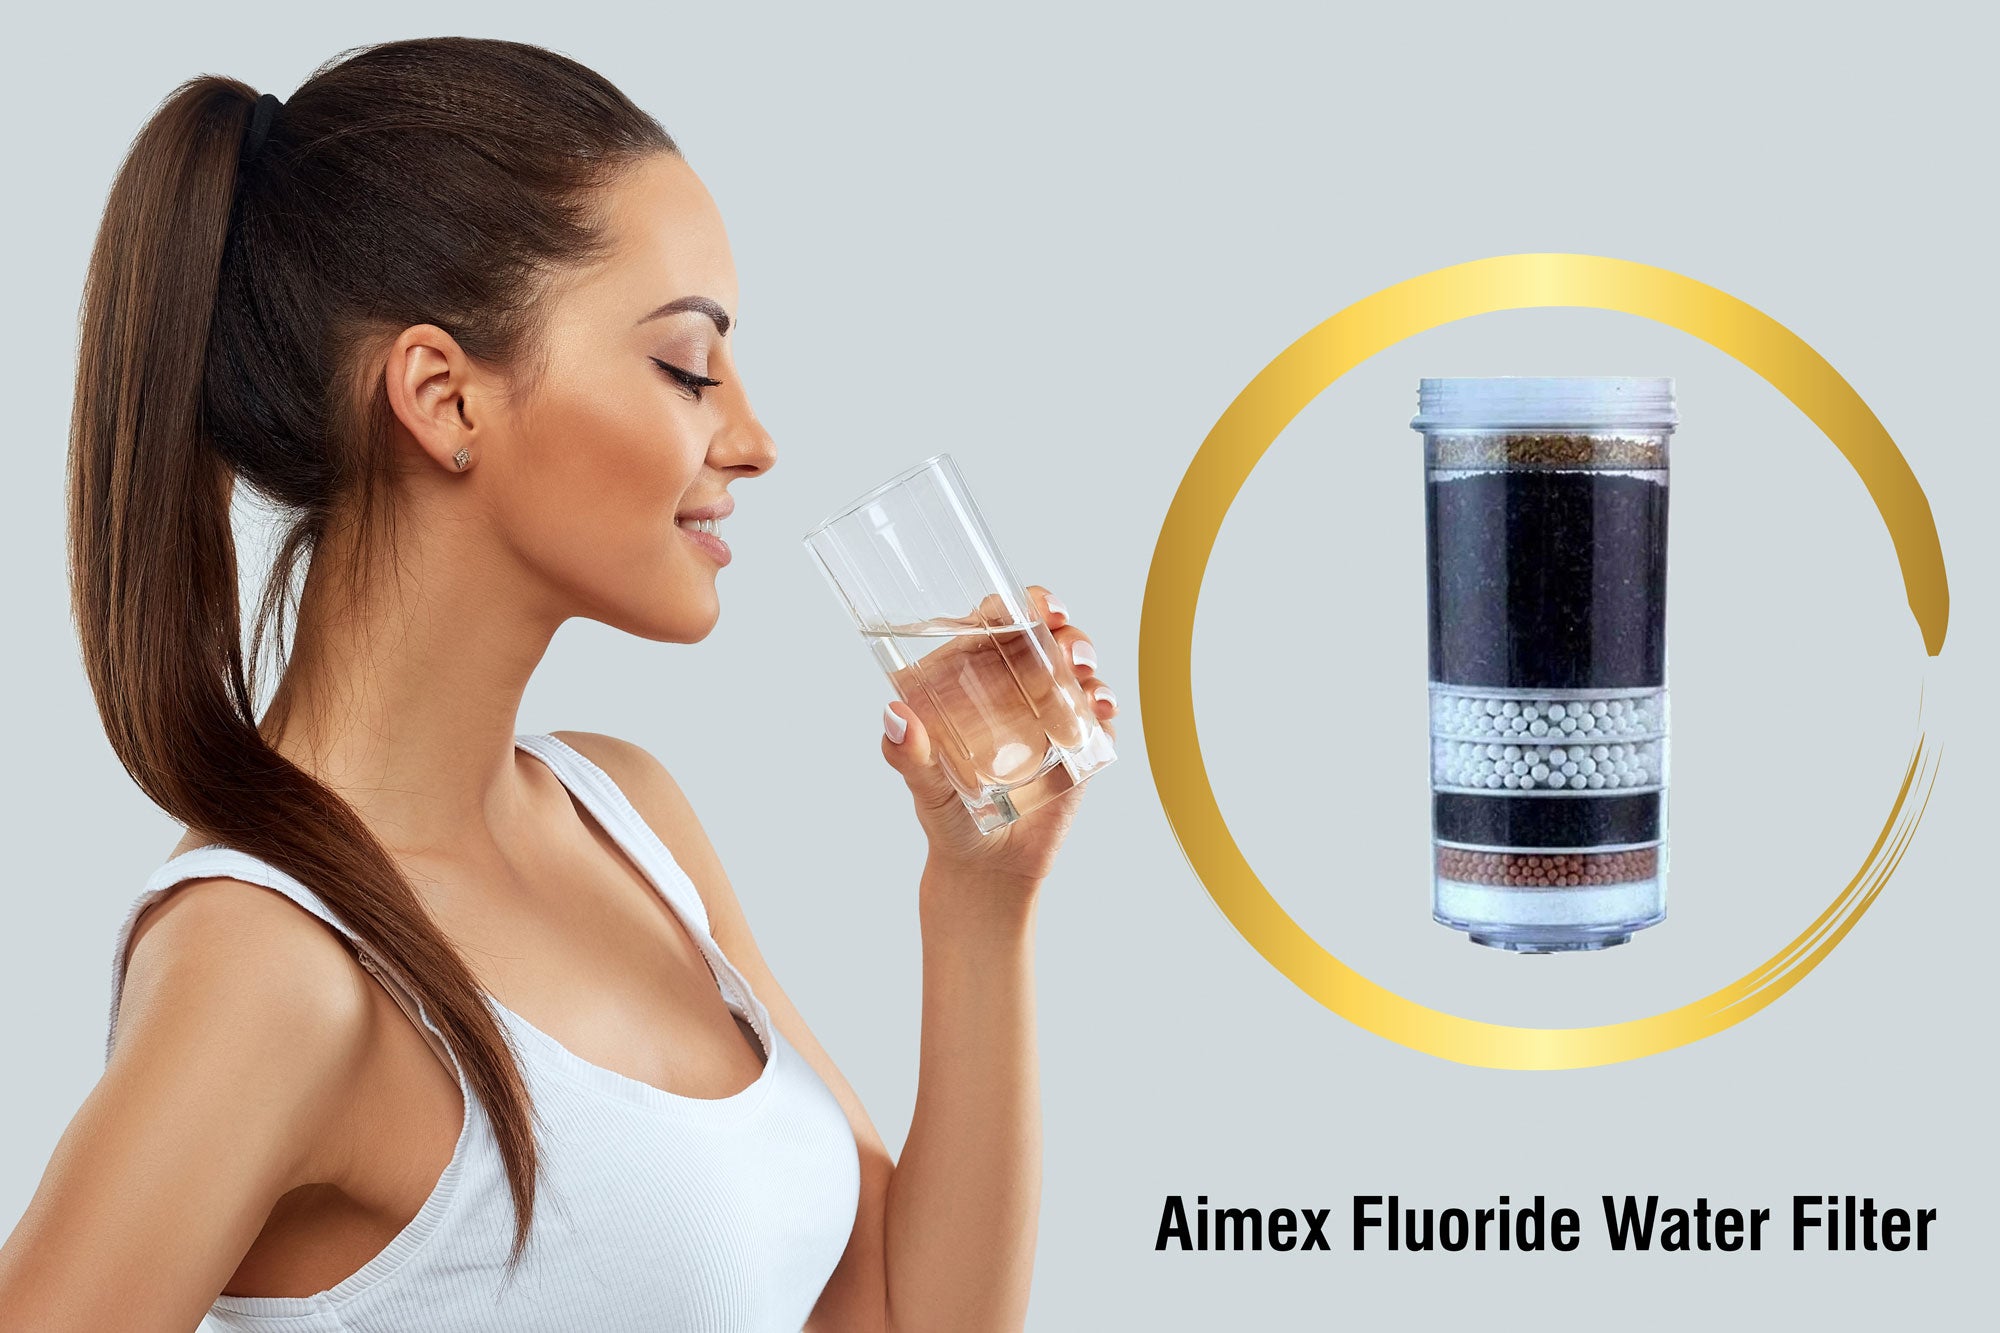 Aimex Fluoride Water Filter Review and Cost